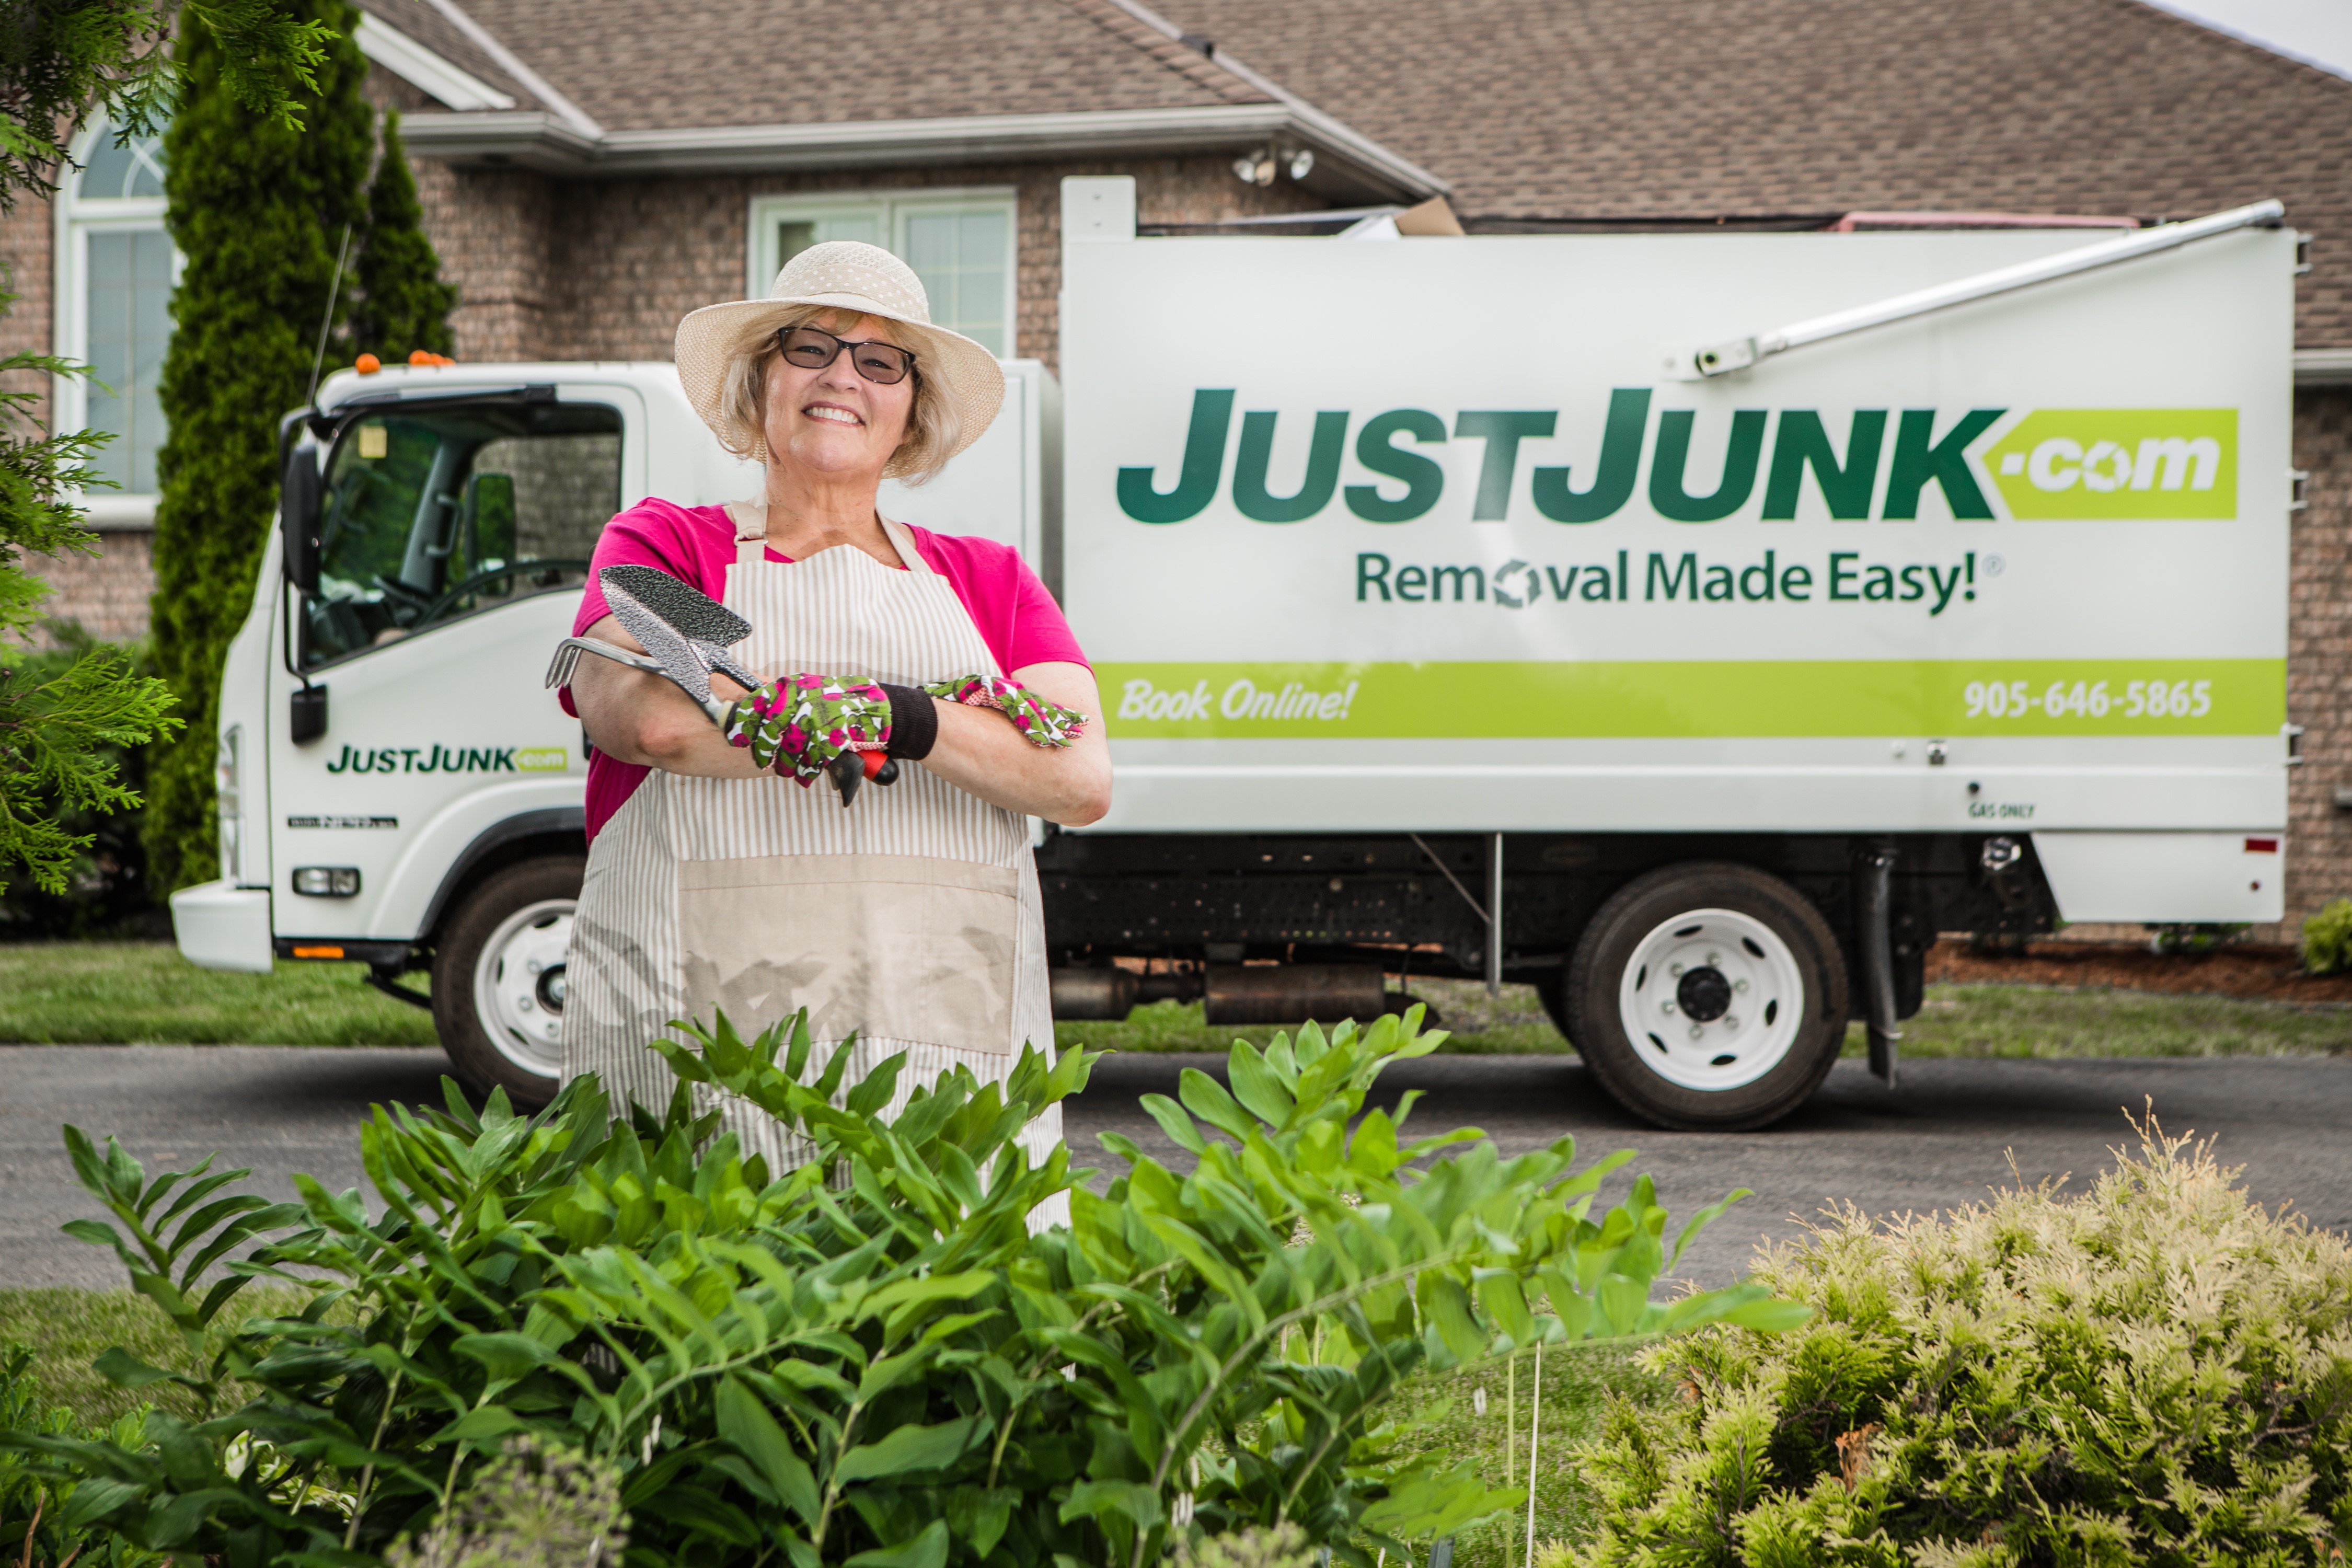 Just Junk - Junk Removal Vancouver